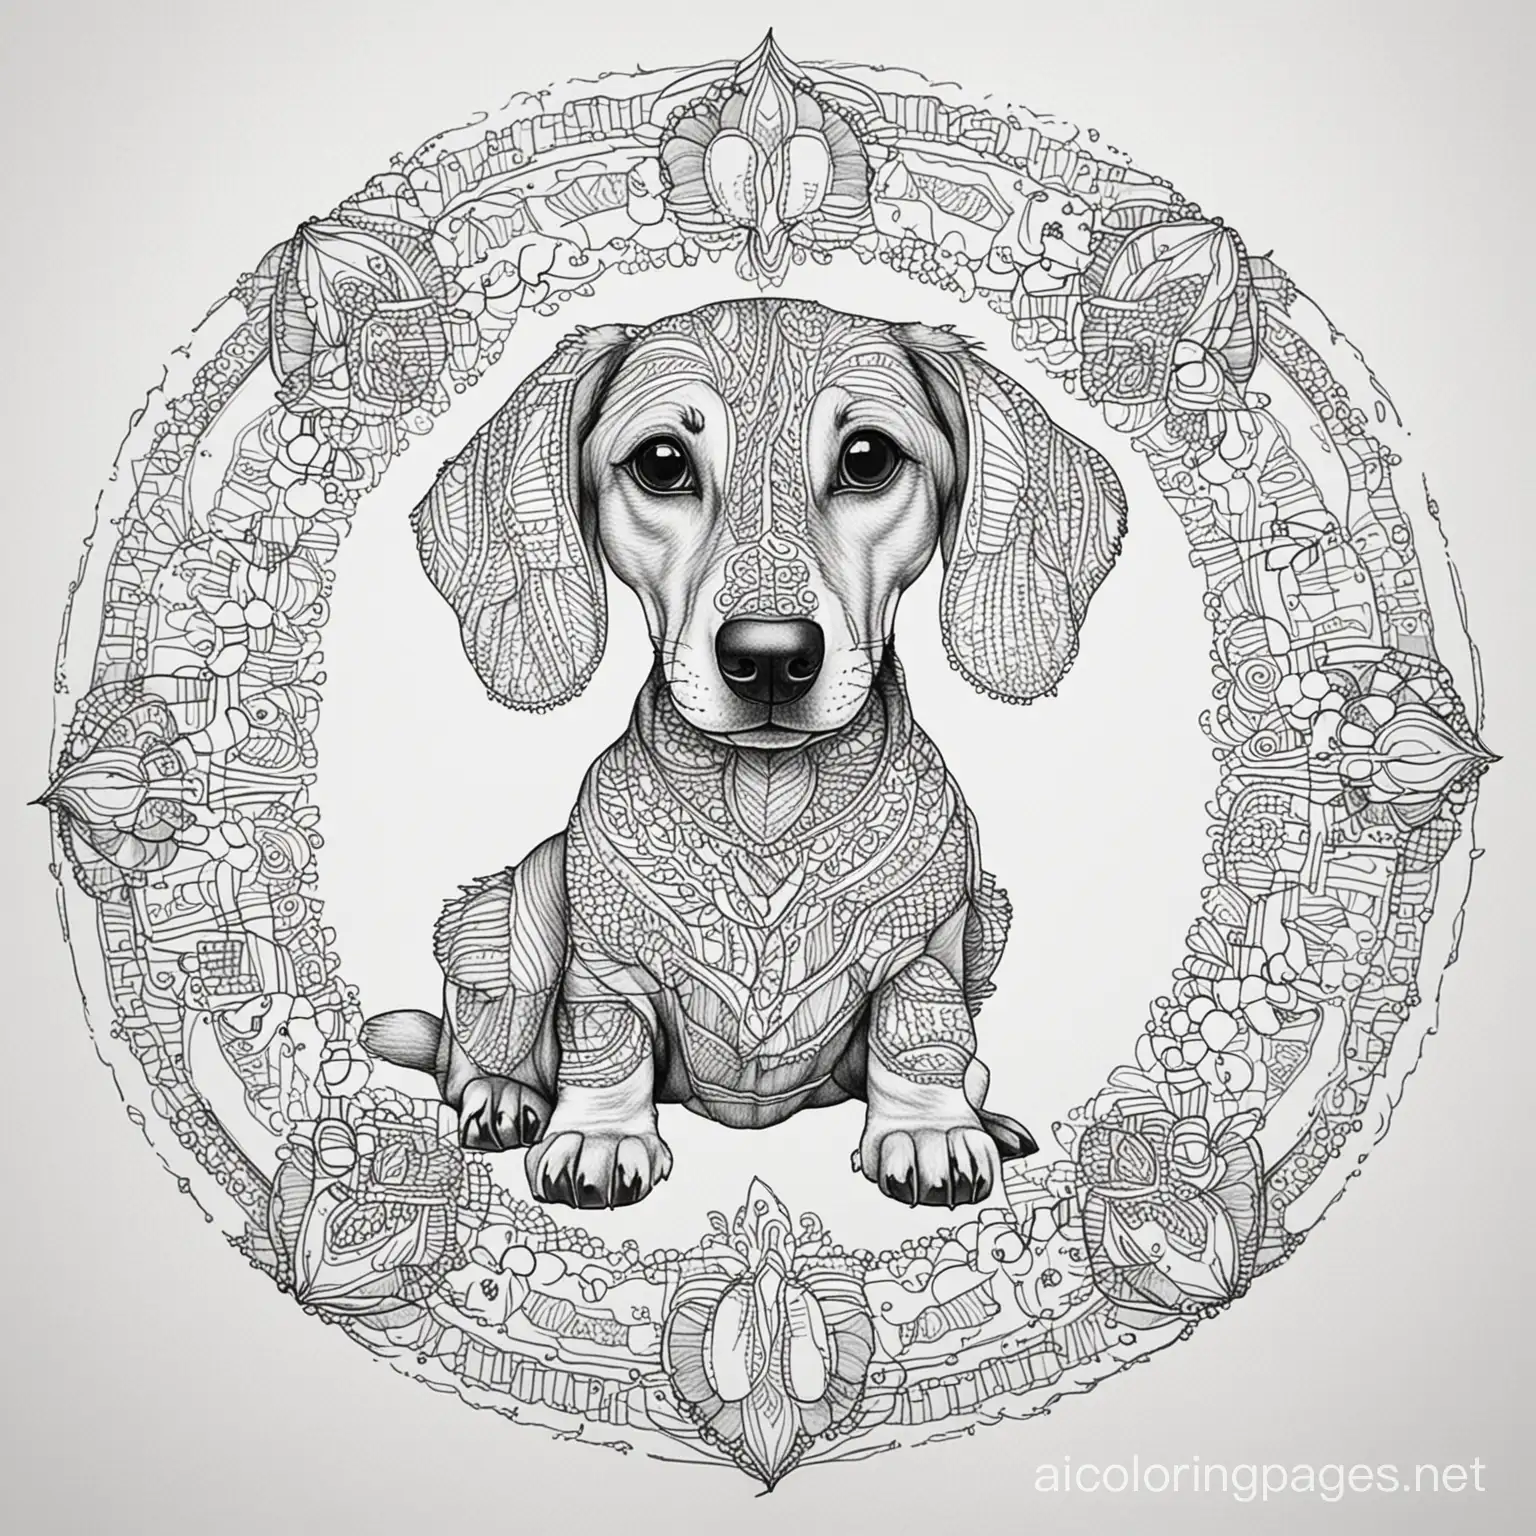 dachshund  dog mandala

, Coloring Page, black and white, line art, white background, Simplicity, Ample White Space. The background of the coloring page is plain white to make it easy for young children to color within the lines. The outlines of all the subjects are easy to distinguish, making it simple for kids to color without too much difficulty